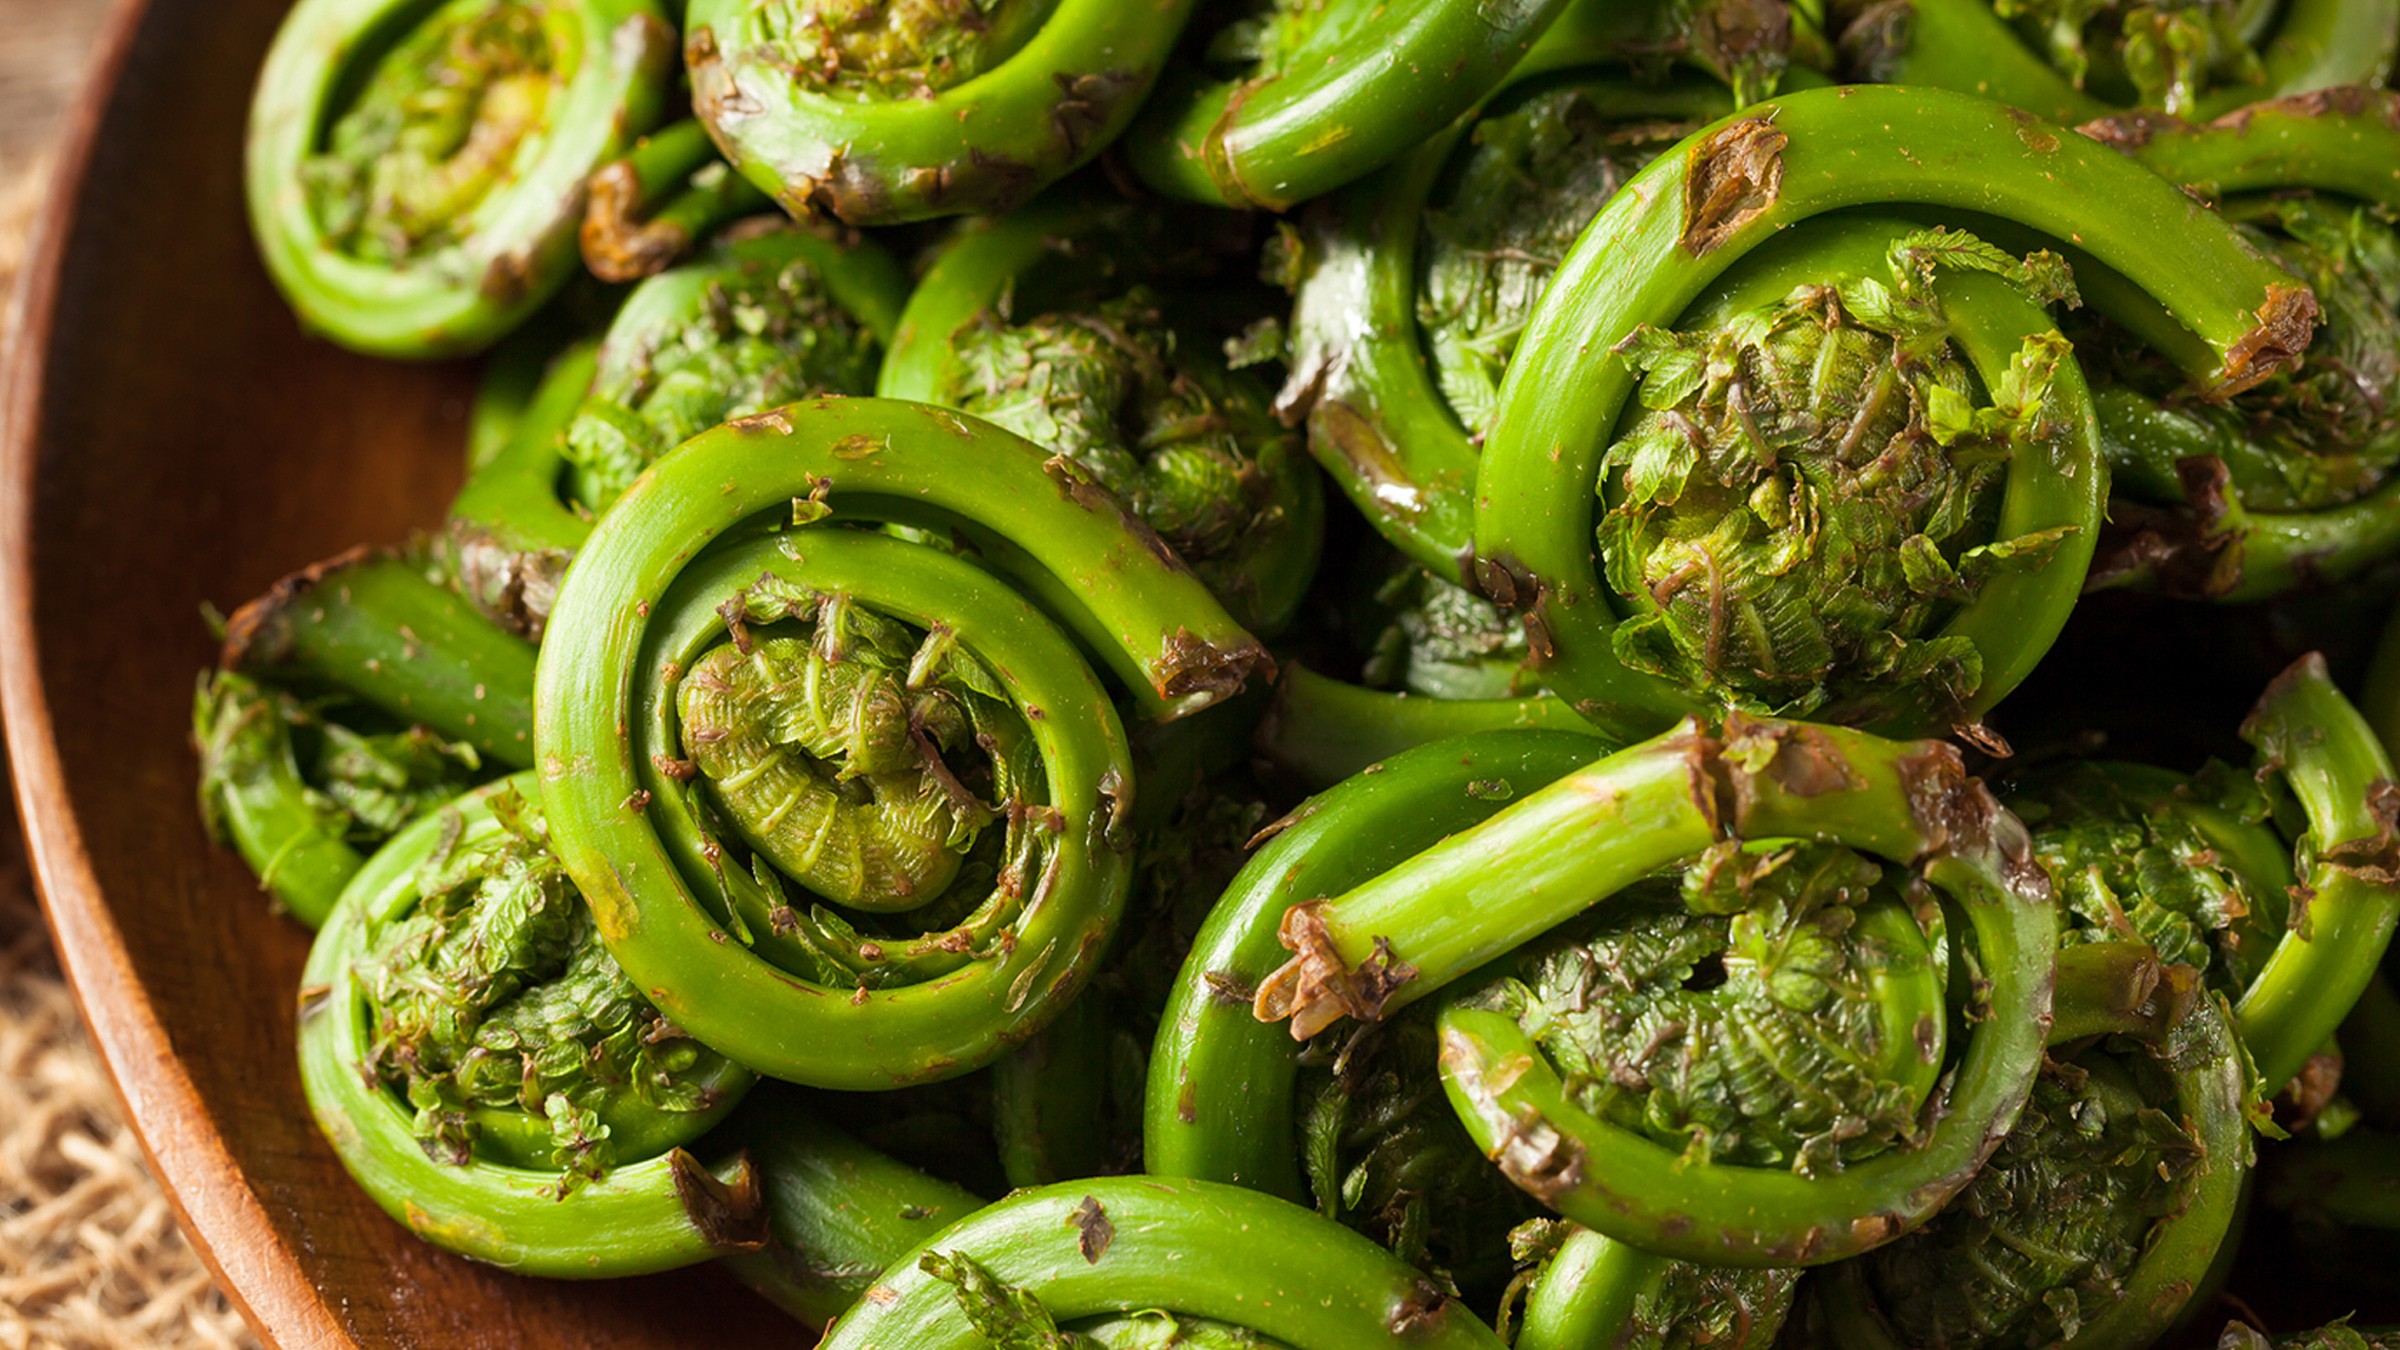 What the Heck is a Fiddlehead?